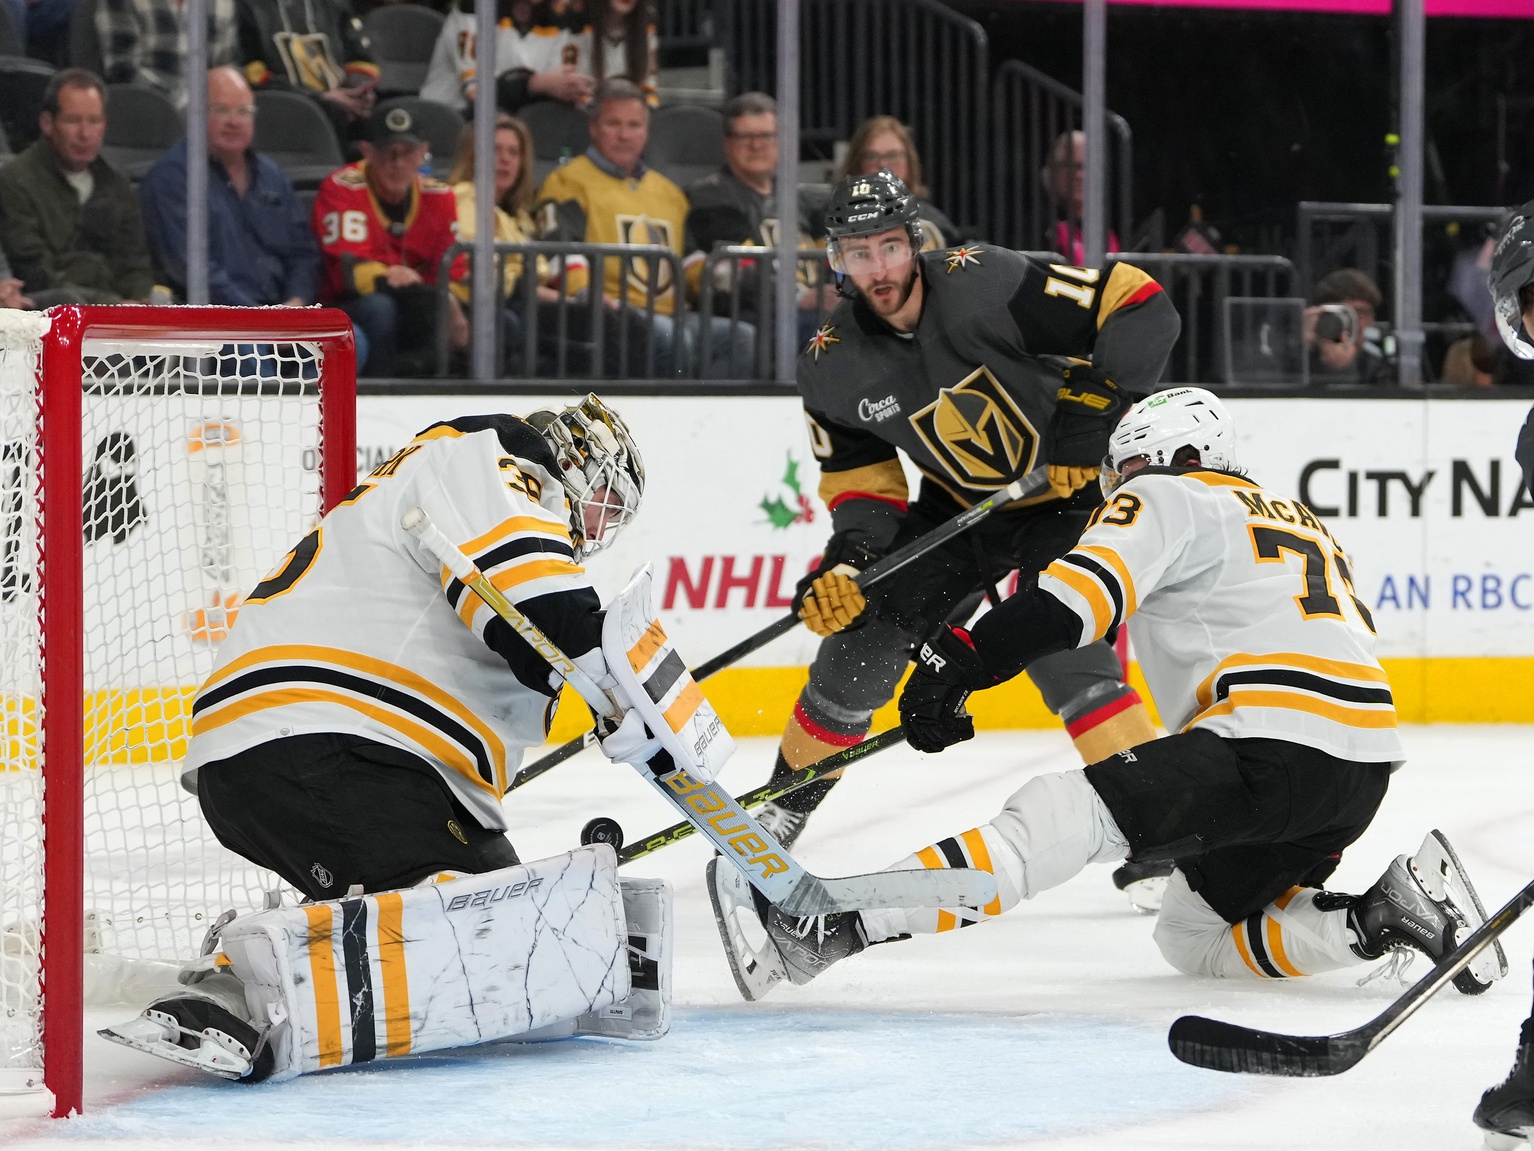 Dec 11, 2022; Las Vegas, Nevada, USA; Boston Bruins defenseman Charlie McAvoy (73) deflects a centering pass from Vegas Golden Knights center Nicolas Roy (10) as Boston Bruins goaltender Linus Ullmark (35) defends his net during the second period at T-Mobile Arena. Mandatory Credit: Stephen R. Sylvanie/USA TODAY Sports